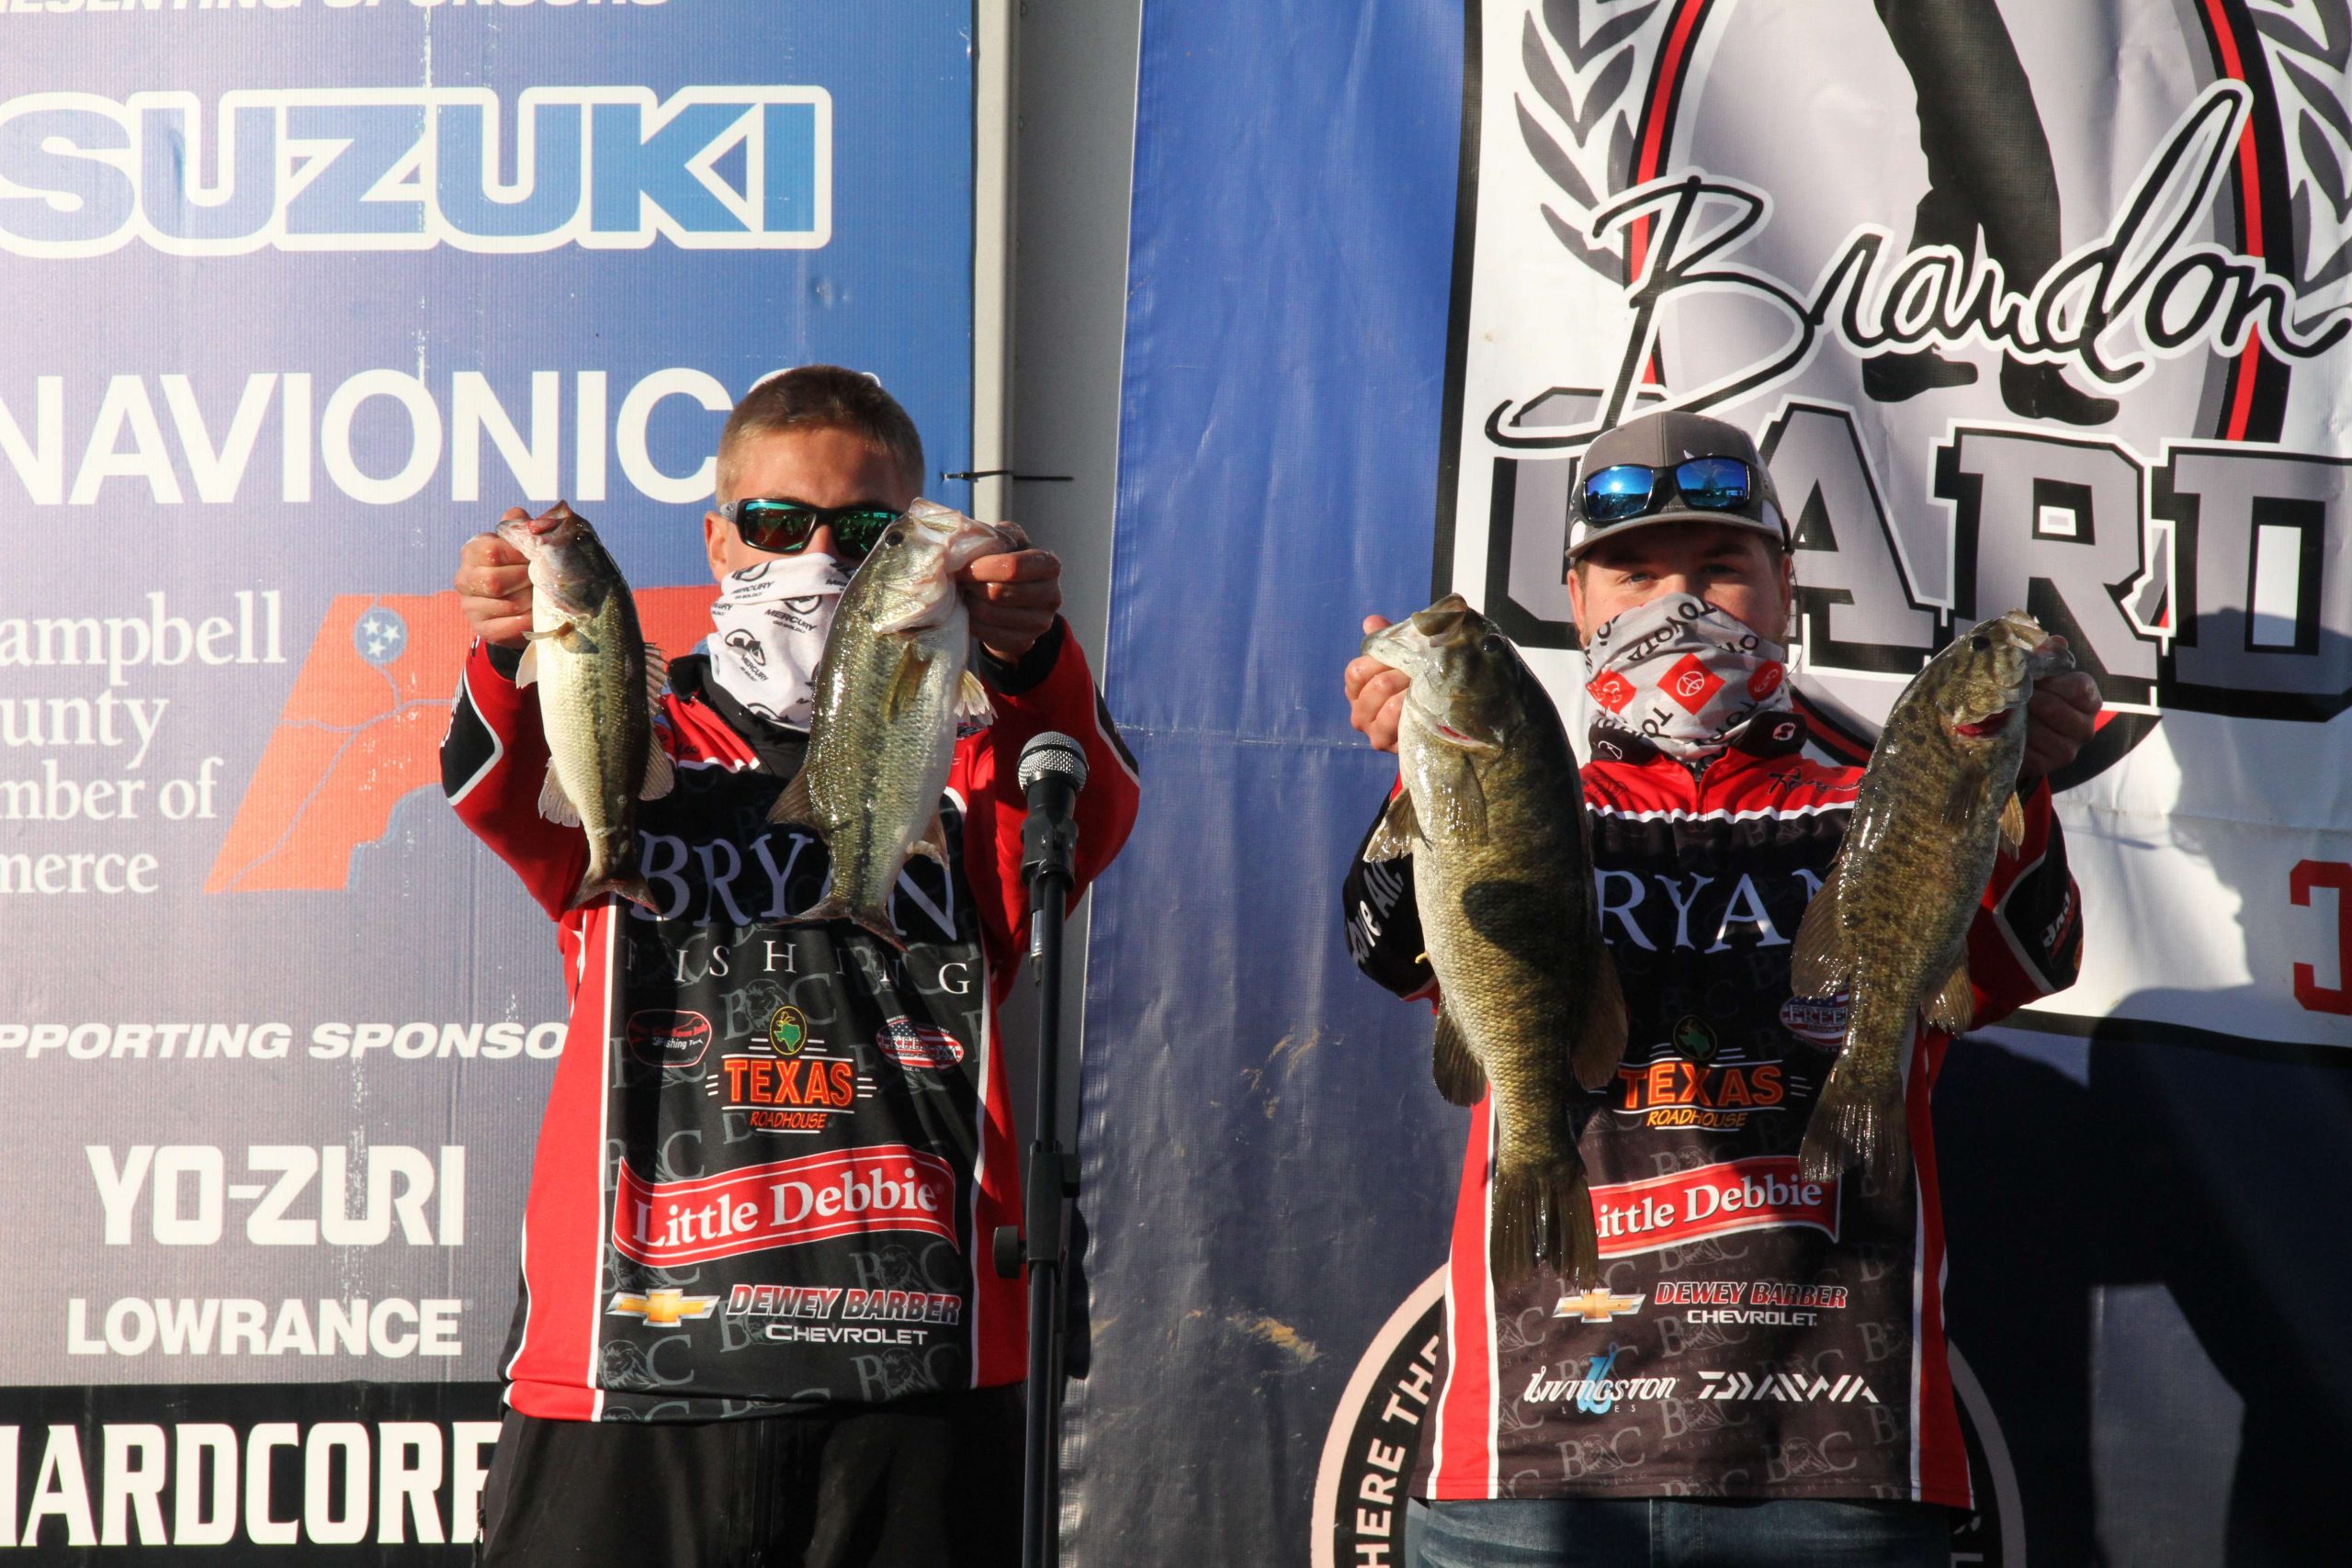 College 2nd Place - Bryan College (Christian Wright & Conner Giles) 11.49lbs